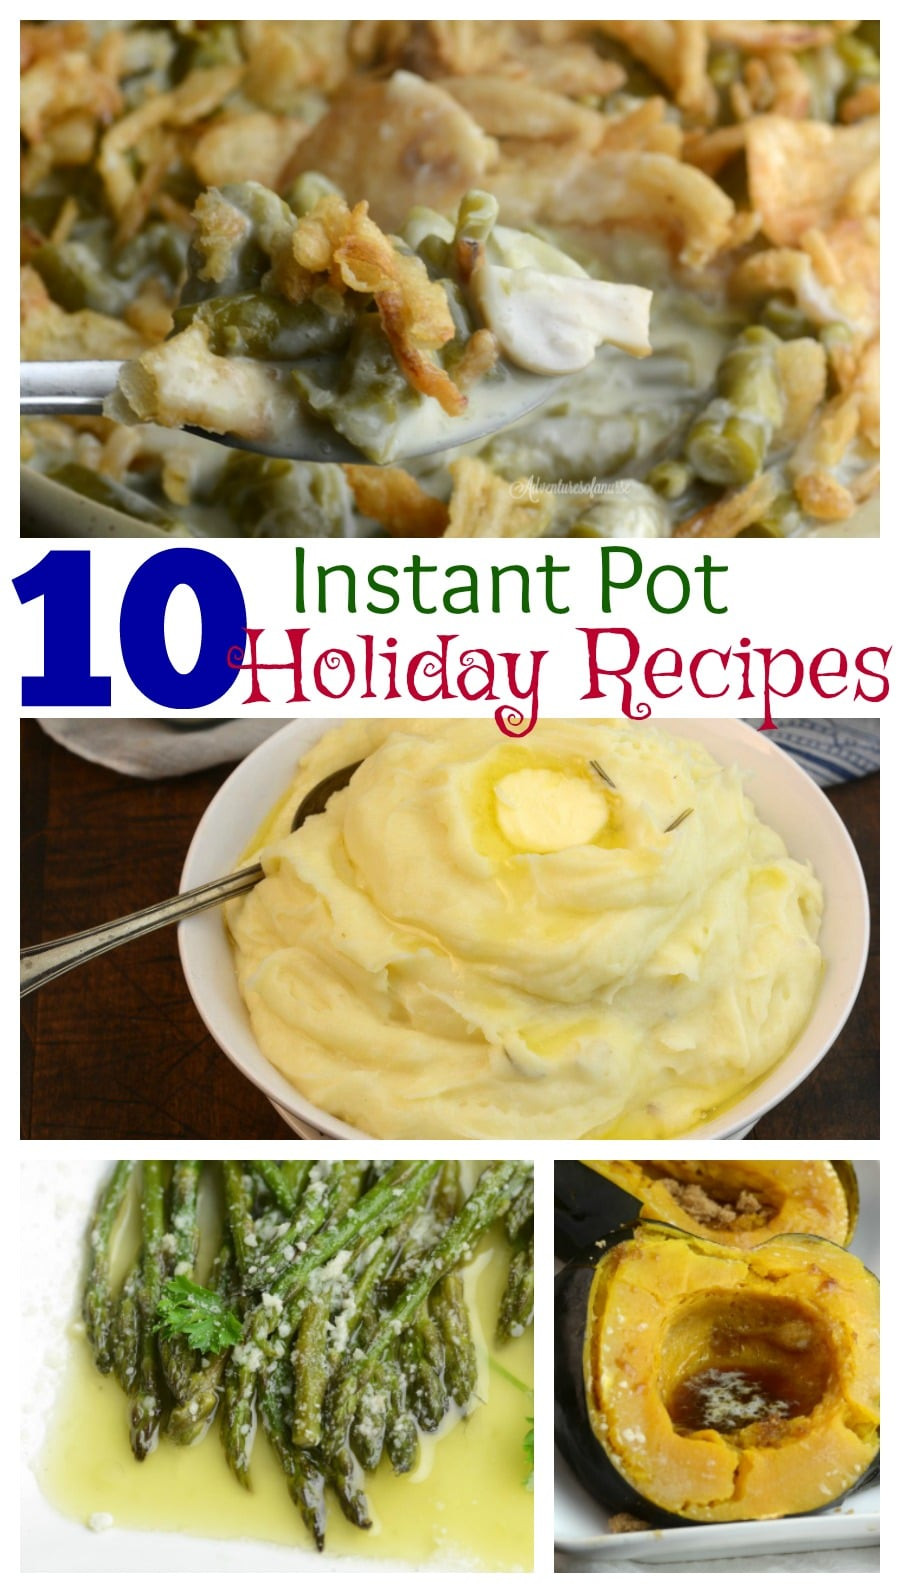 Instant Pot Holiday Recipes
 10 Holiday Instant Pot Must Have Recipes Adventures of a